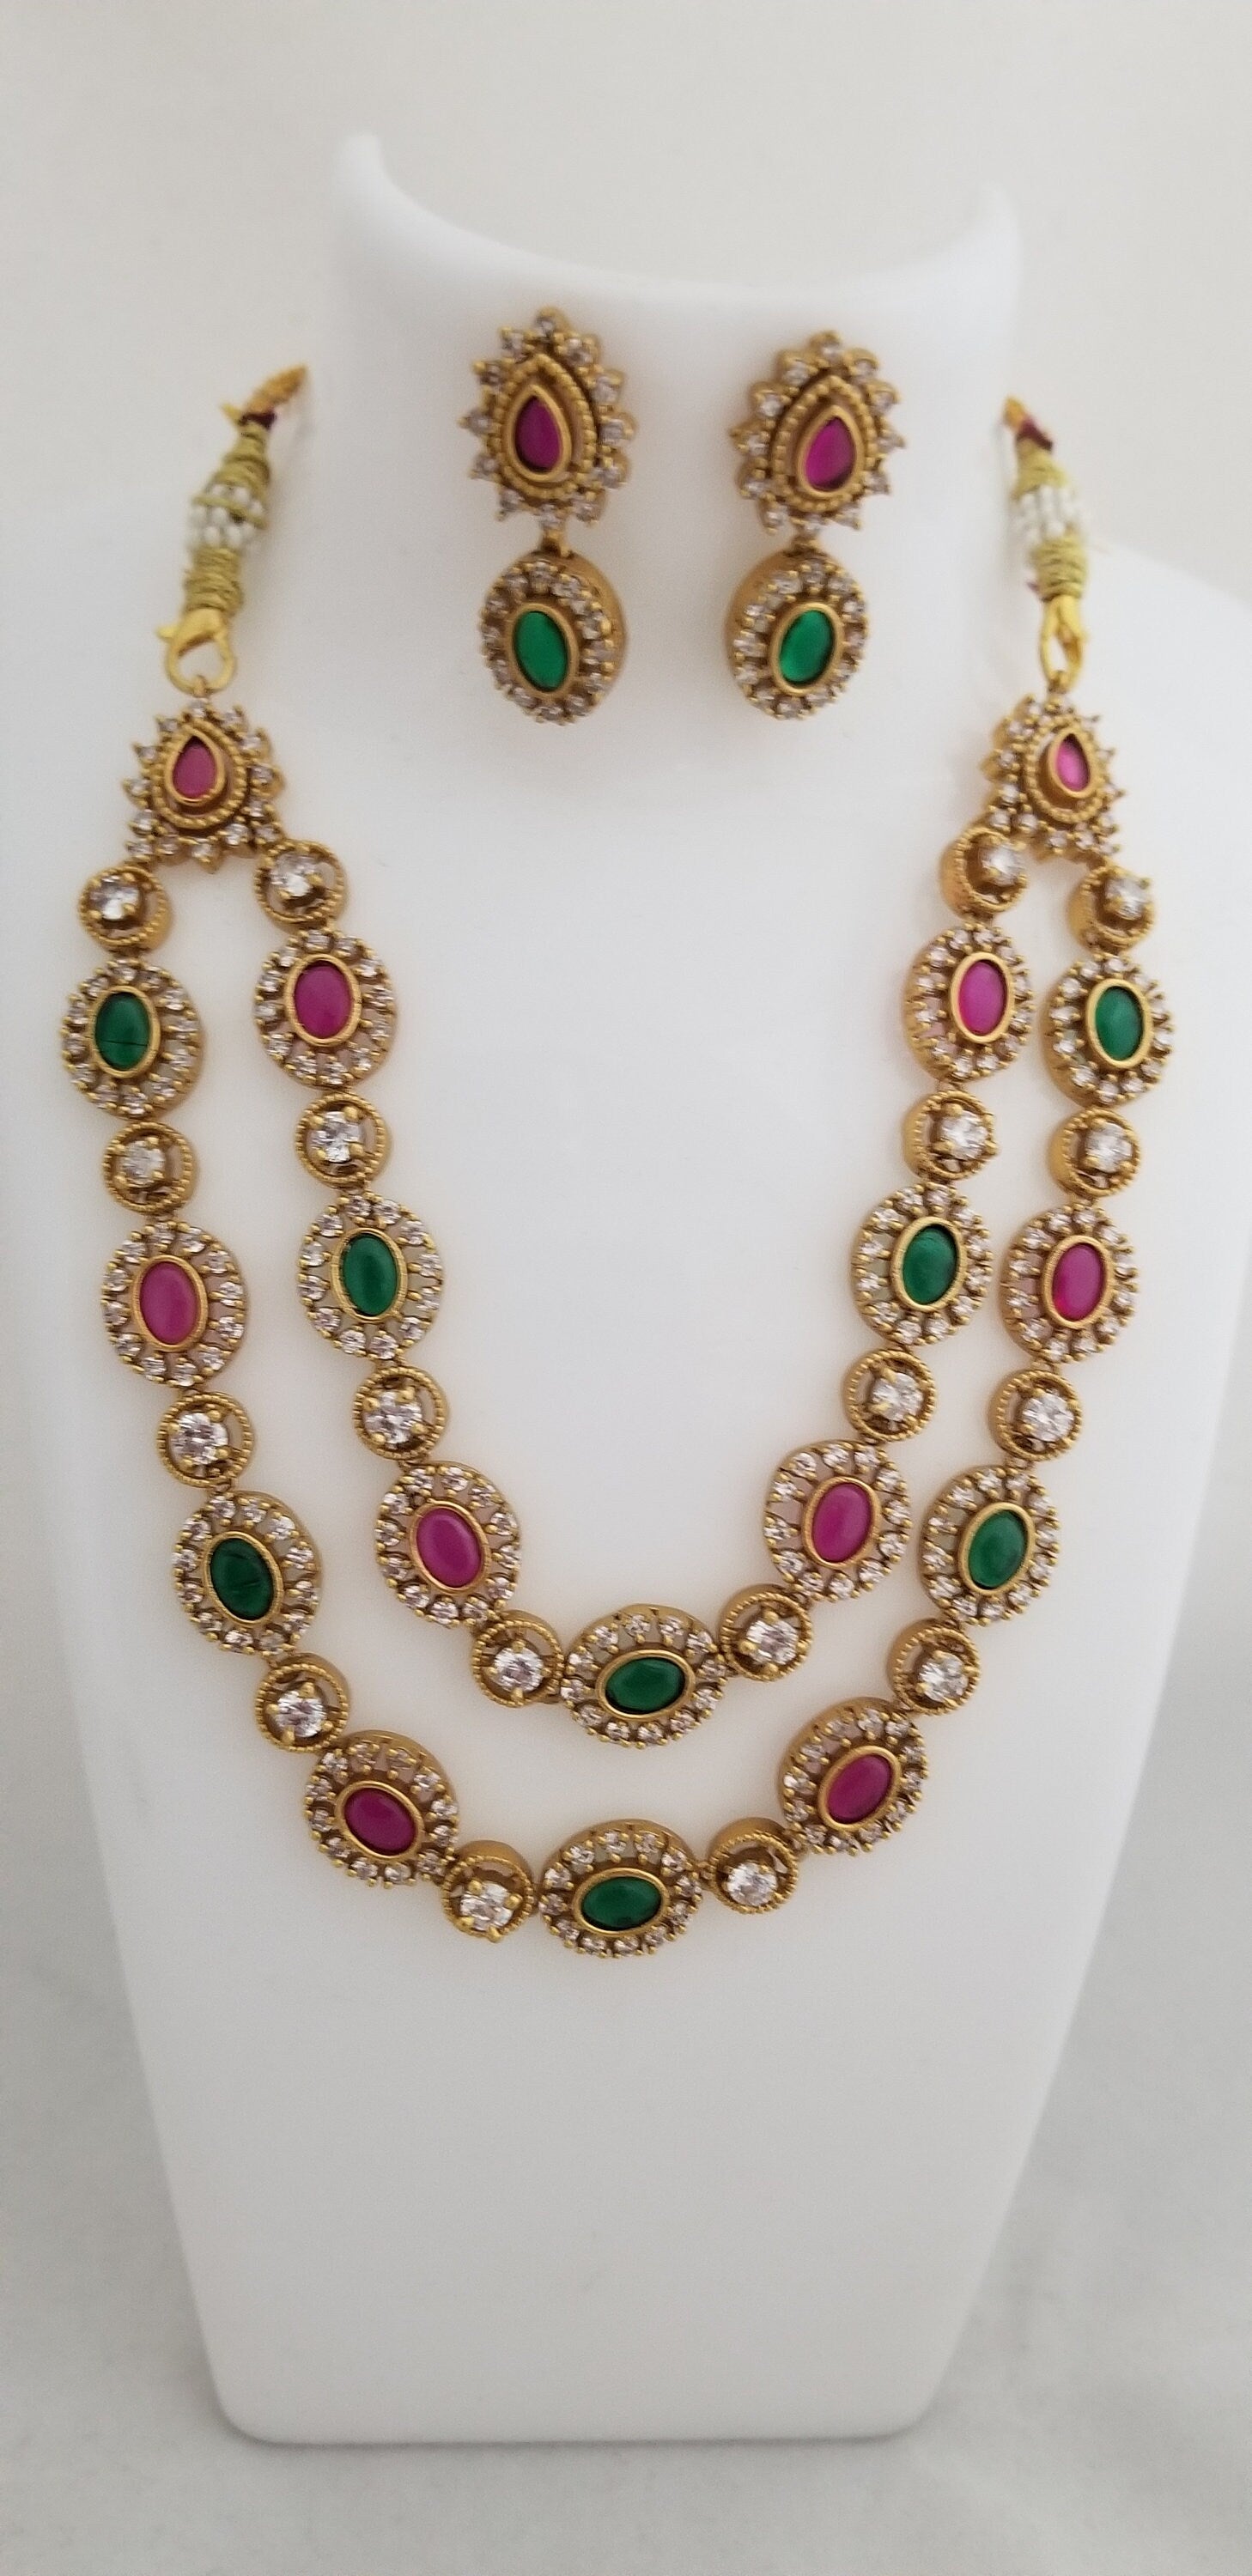 Premium Quality Double layer Matte finish Multi-color Necklace with Earrings